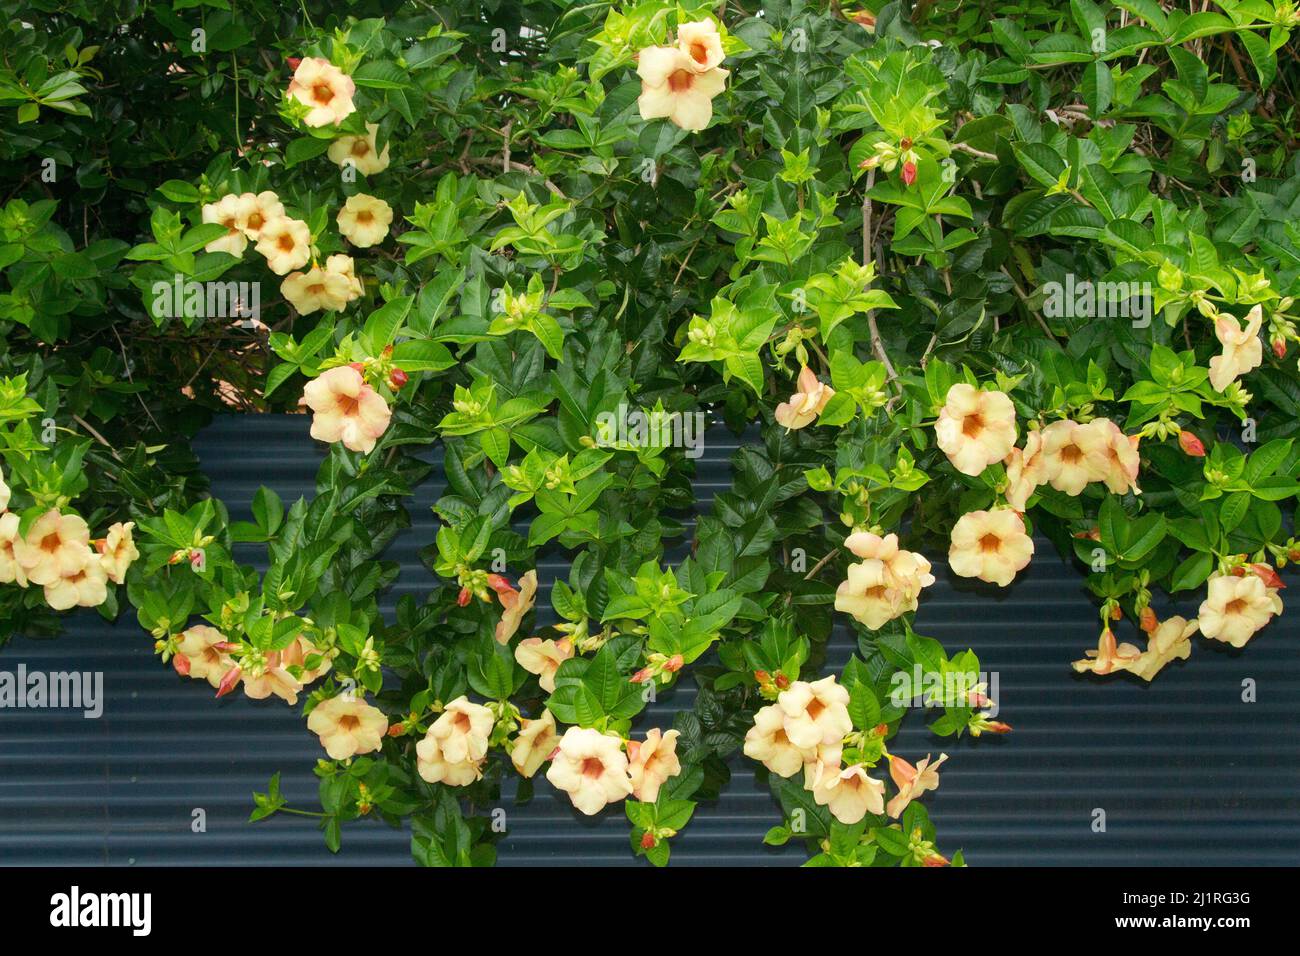 Unusual climbing plant Allamanda cathartica 'Jamaican Sunset' covered with beautiful apricot yellow flowers and bright green leaves on garden fence Stock Photo